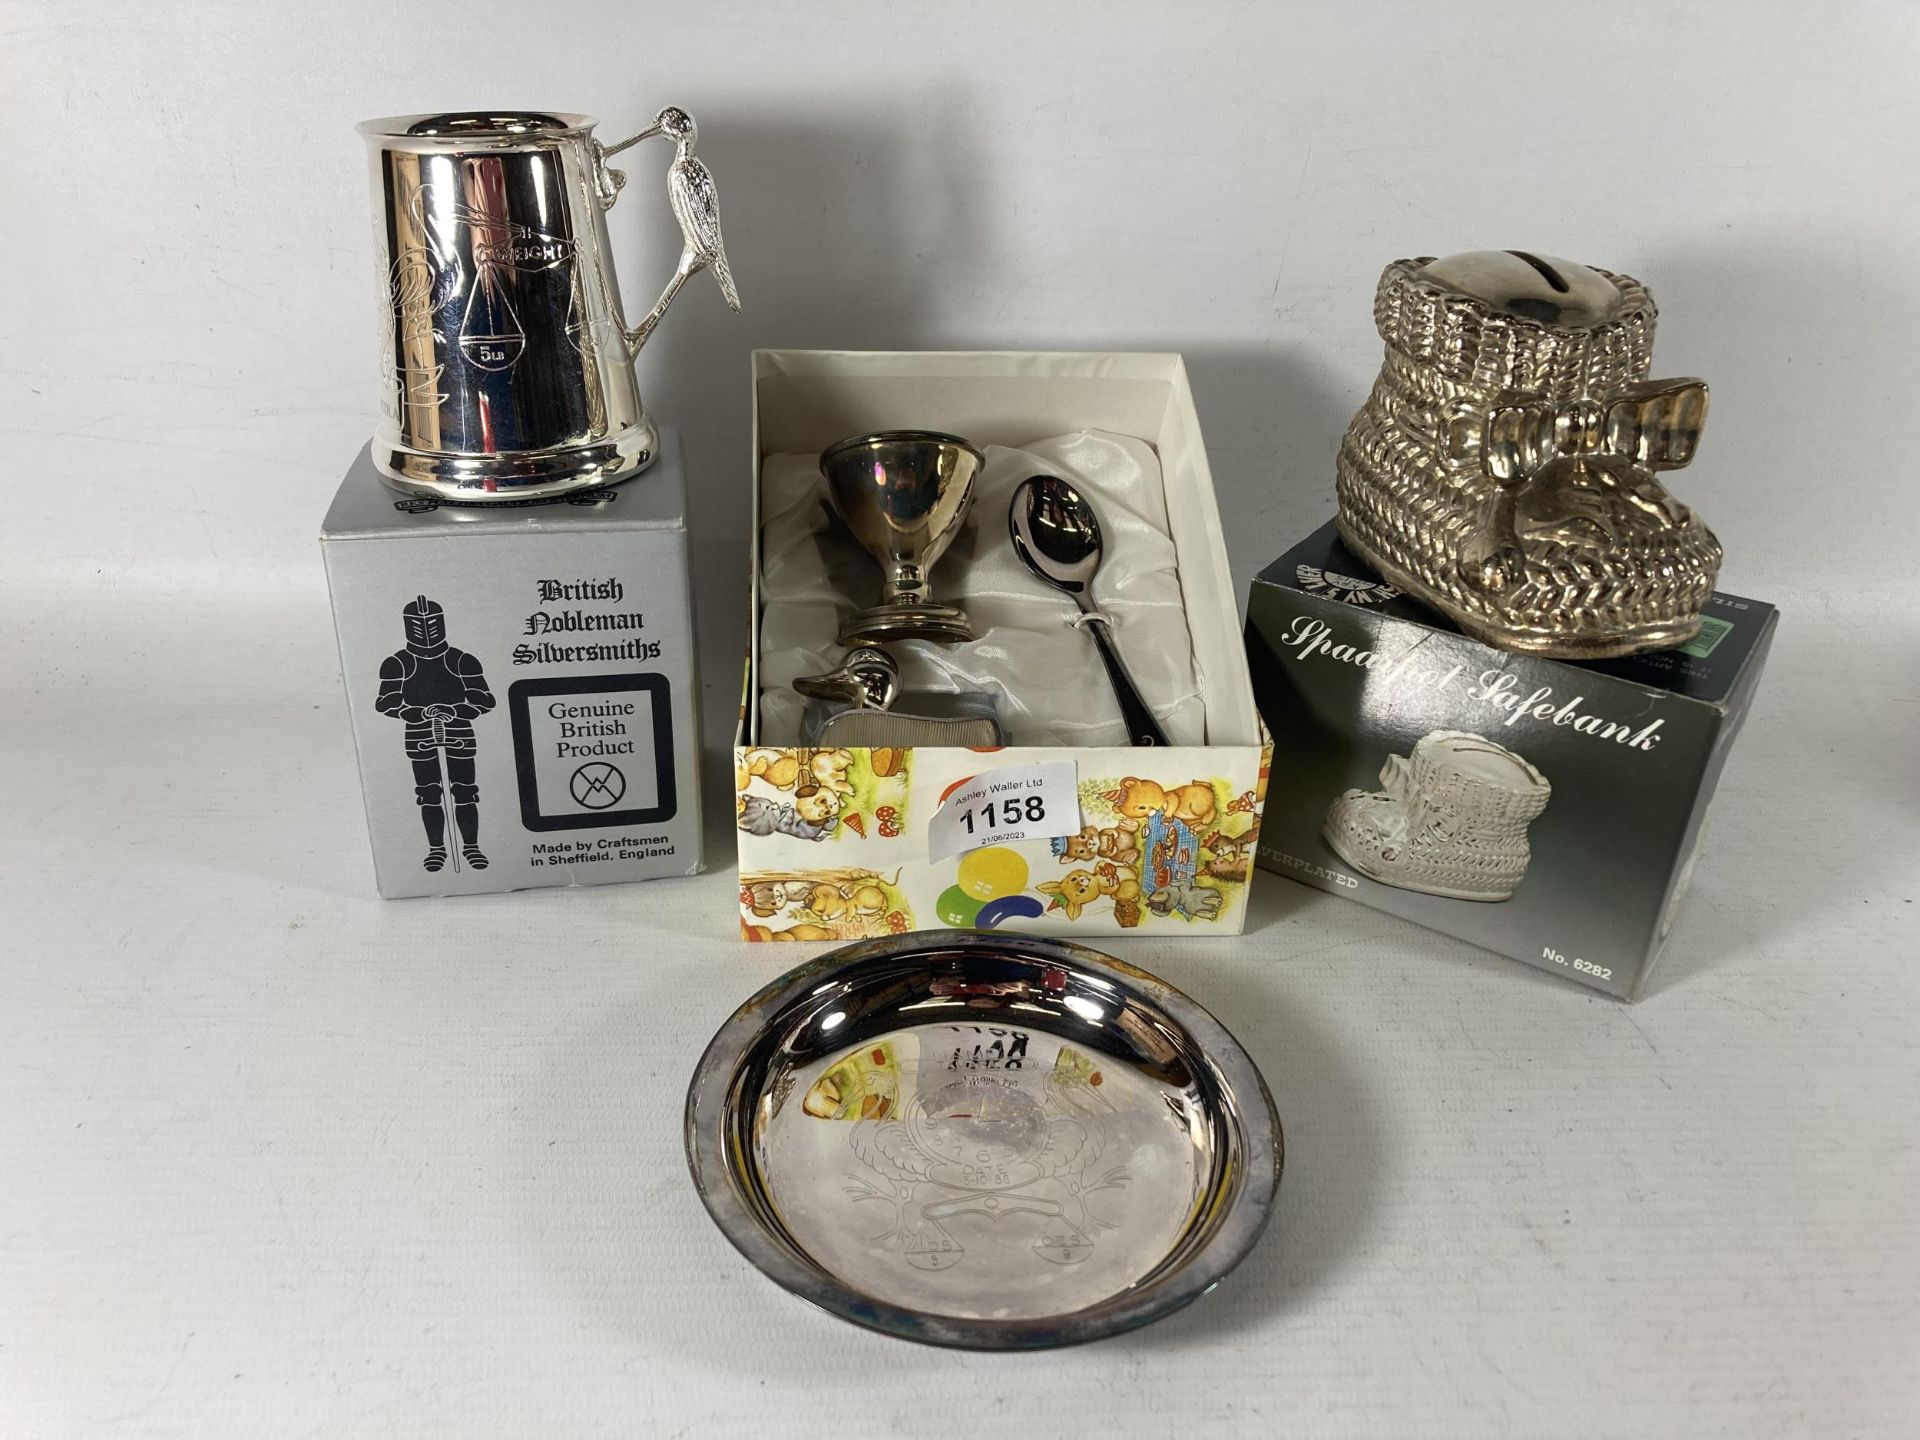 A QUANTITY OF SILVER PLATED BABY ITEMS TO INCLUDE A TANKARD, BOOTIE MONEY BOX, SMALL PLATE AND EGG